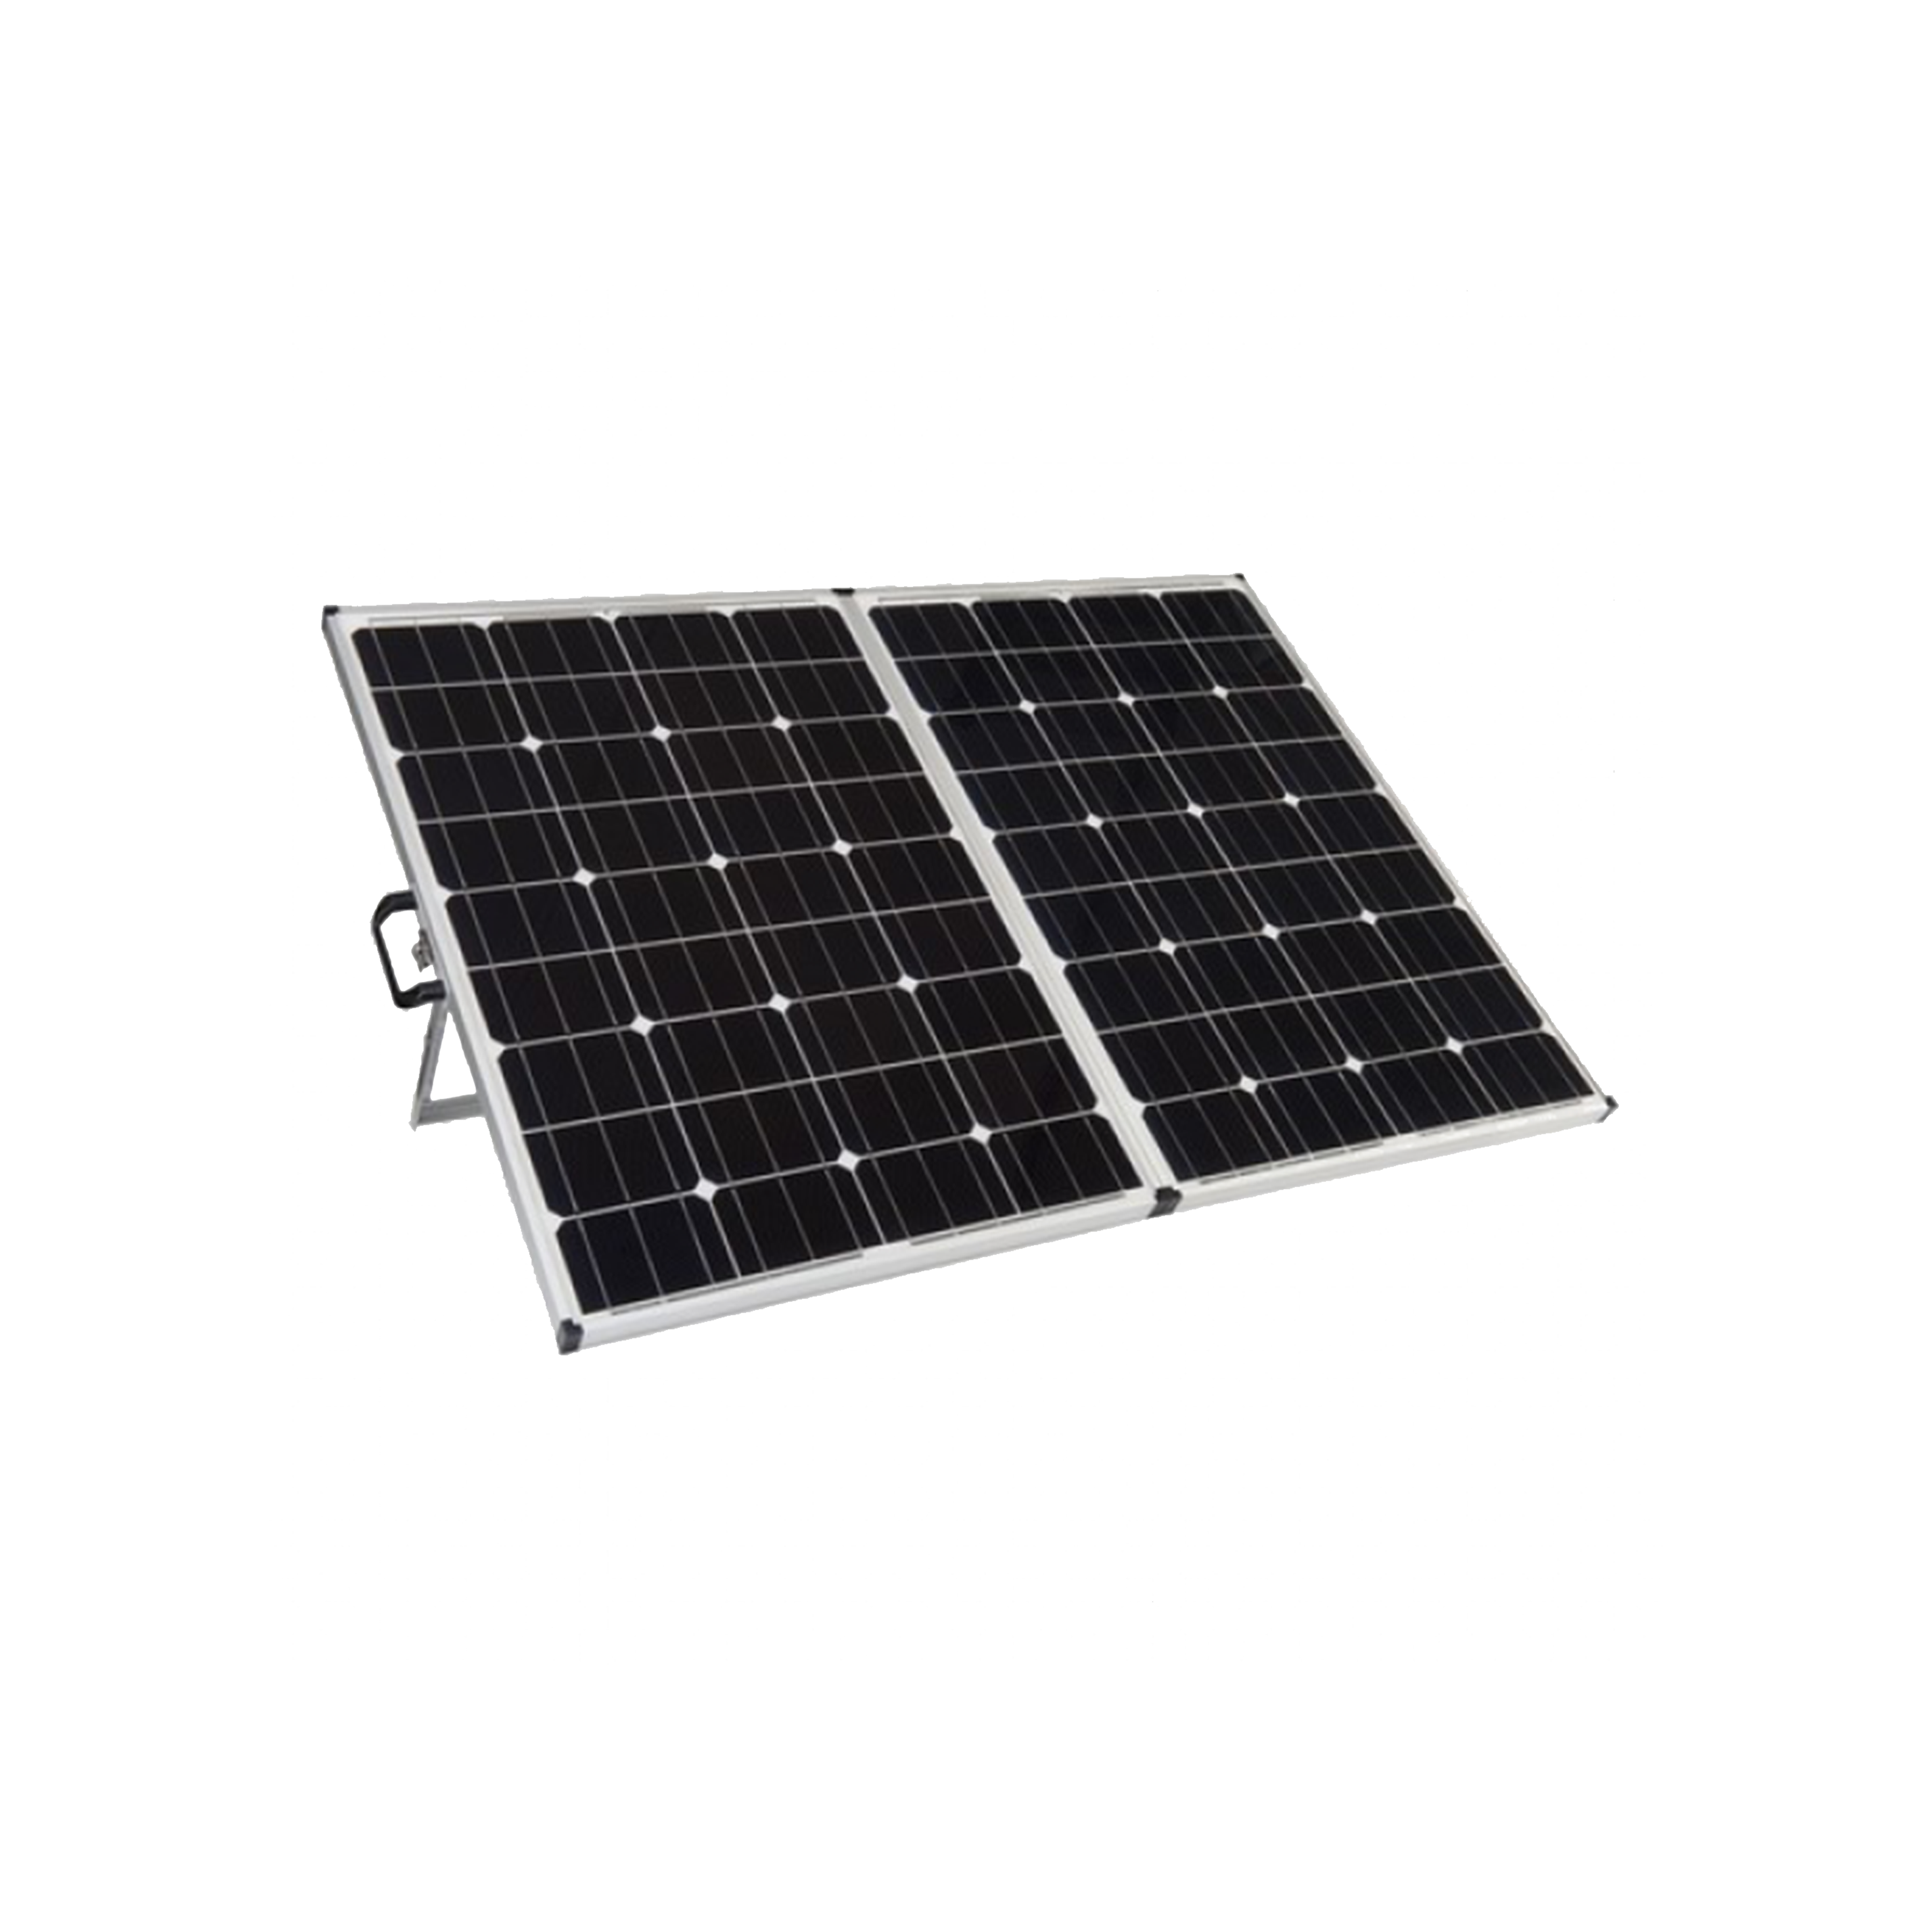 BASSCOMM NIGERIA LIMITED, LEADING SUPPLIER AND INSTALLER OF SOLAR